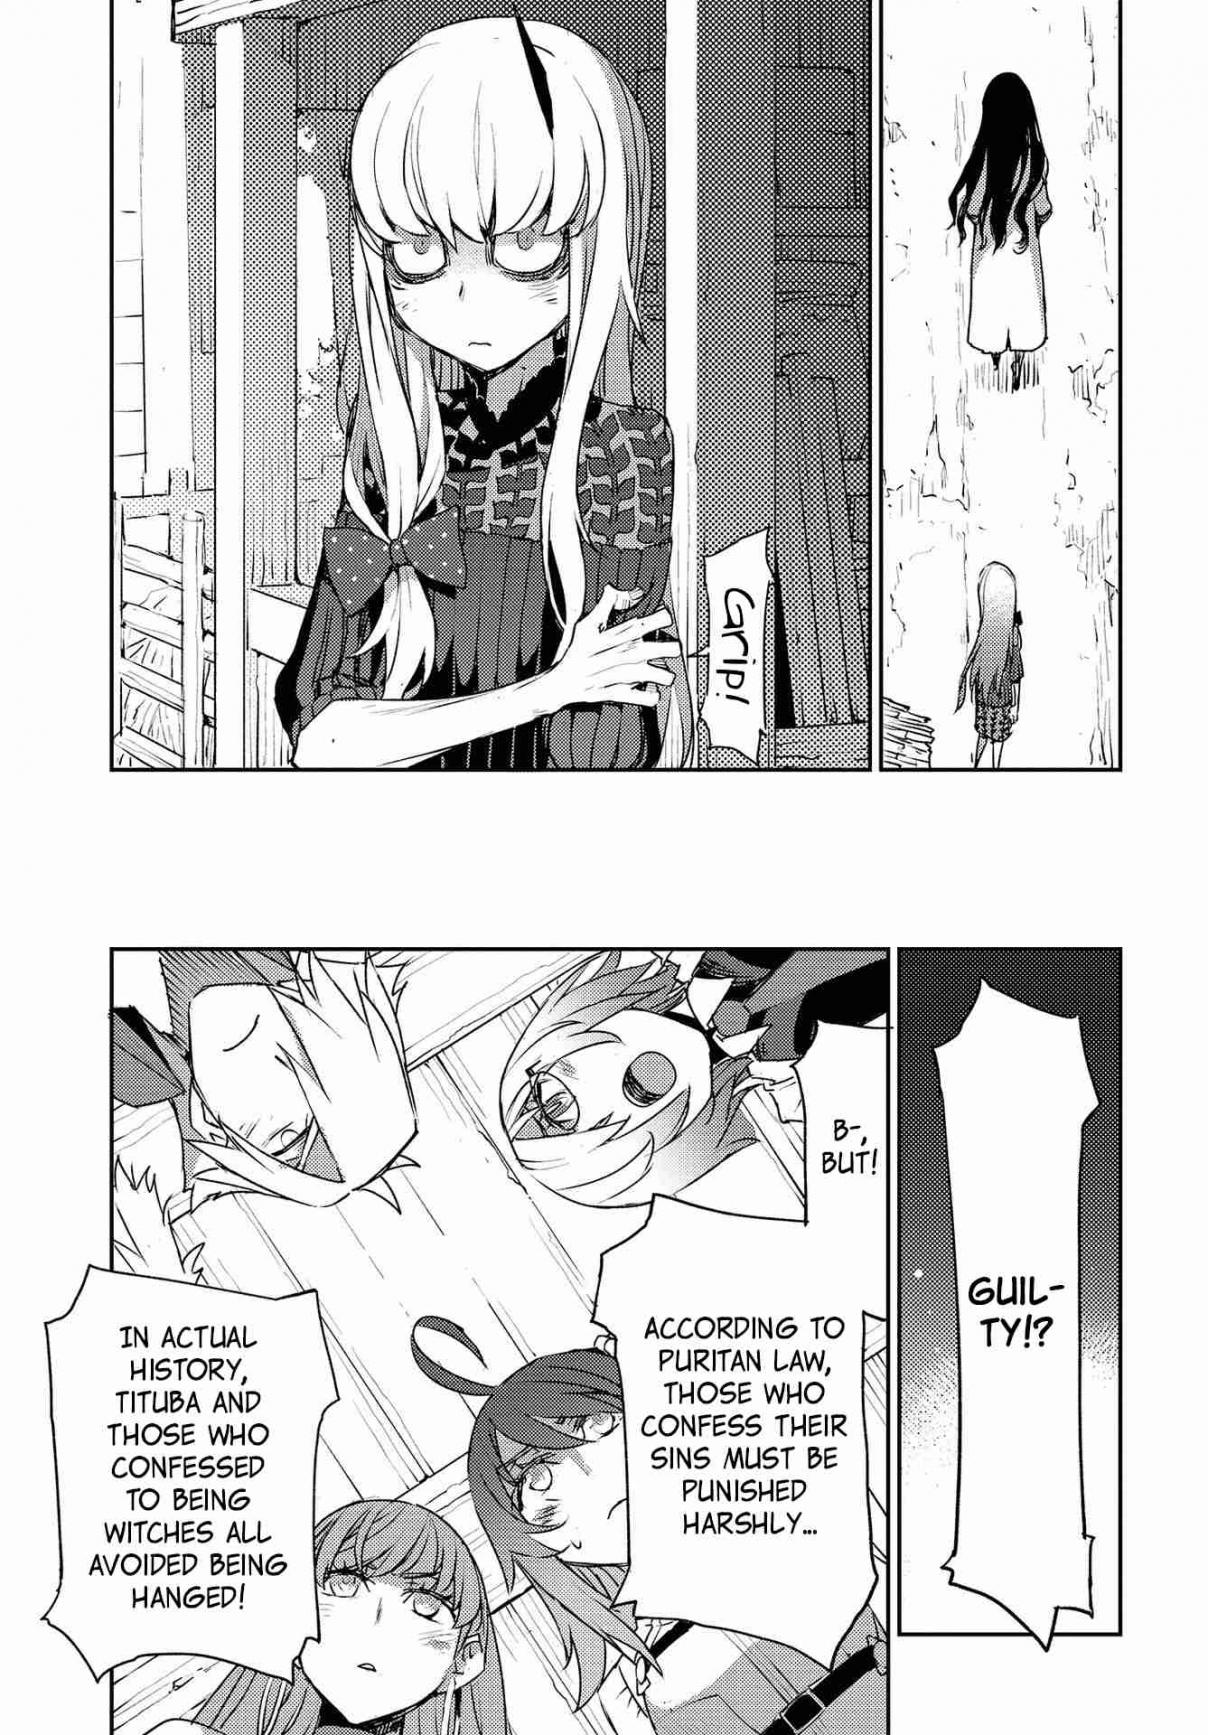 Fate/Grand Order: Epic of Remnant: Pseudo Singularity IV: The Forbidden Advent Garden, Salem Heretical Salem Ch. 11 The First Knot 1